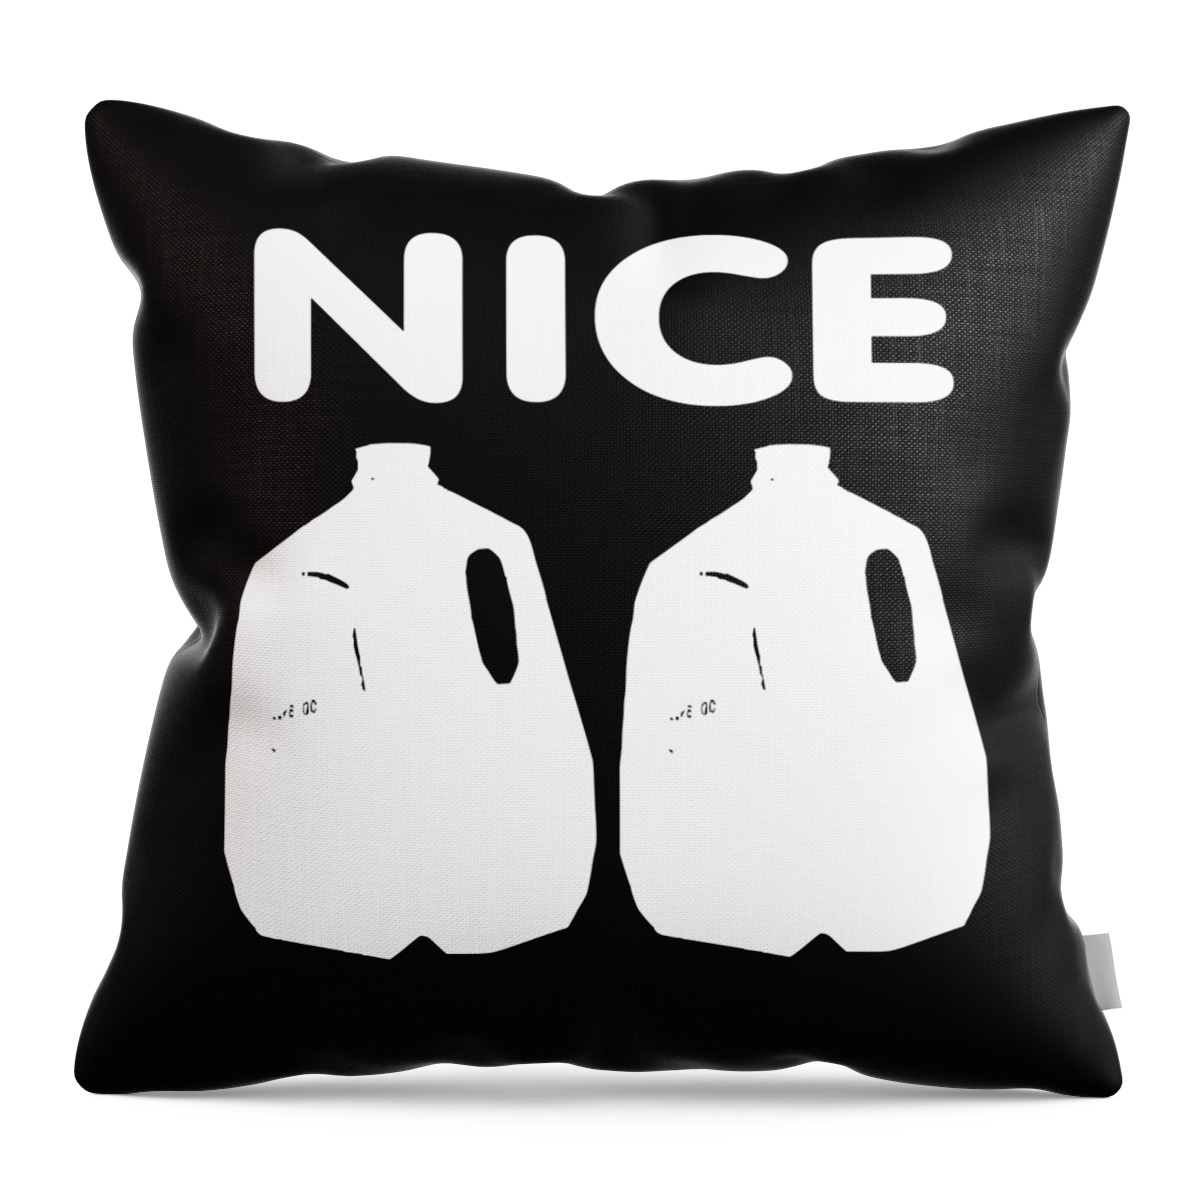 Funny Throw Pillow featuring the digital art Nice Jugs by Flippin Sweet Gear